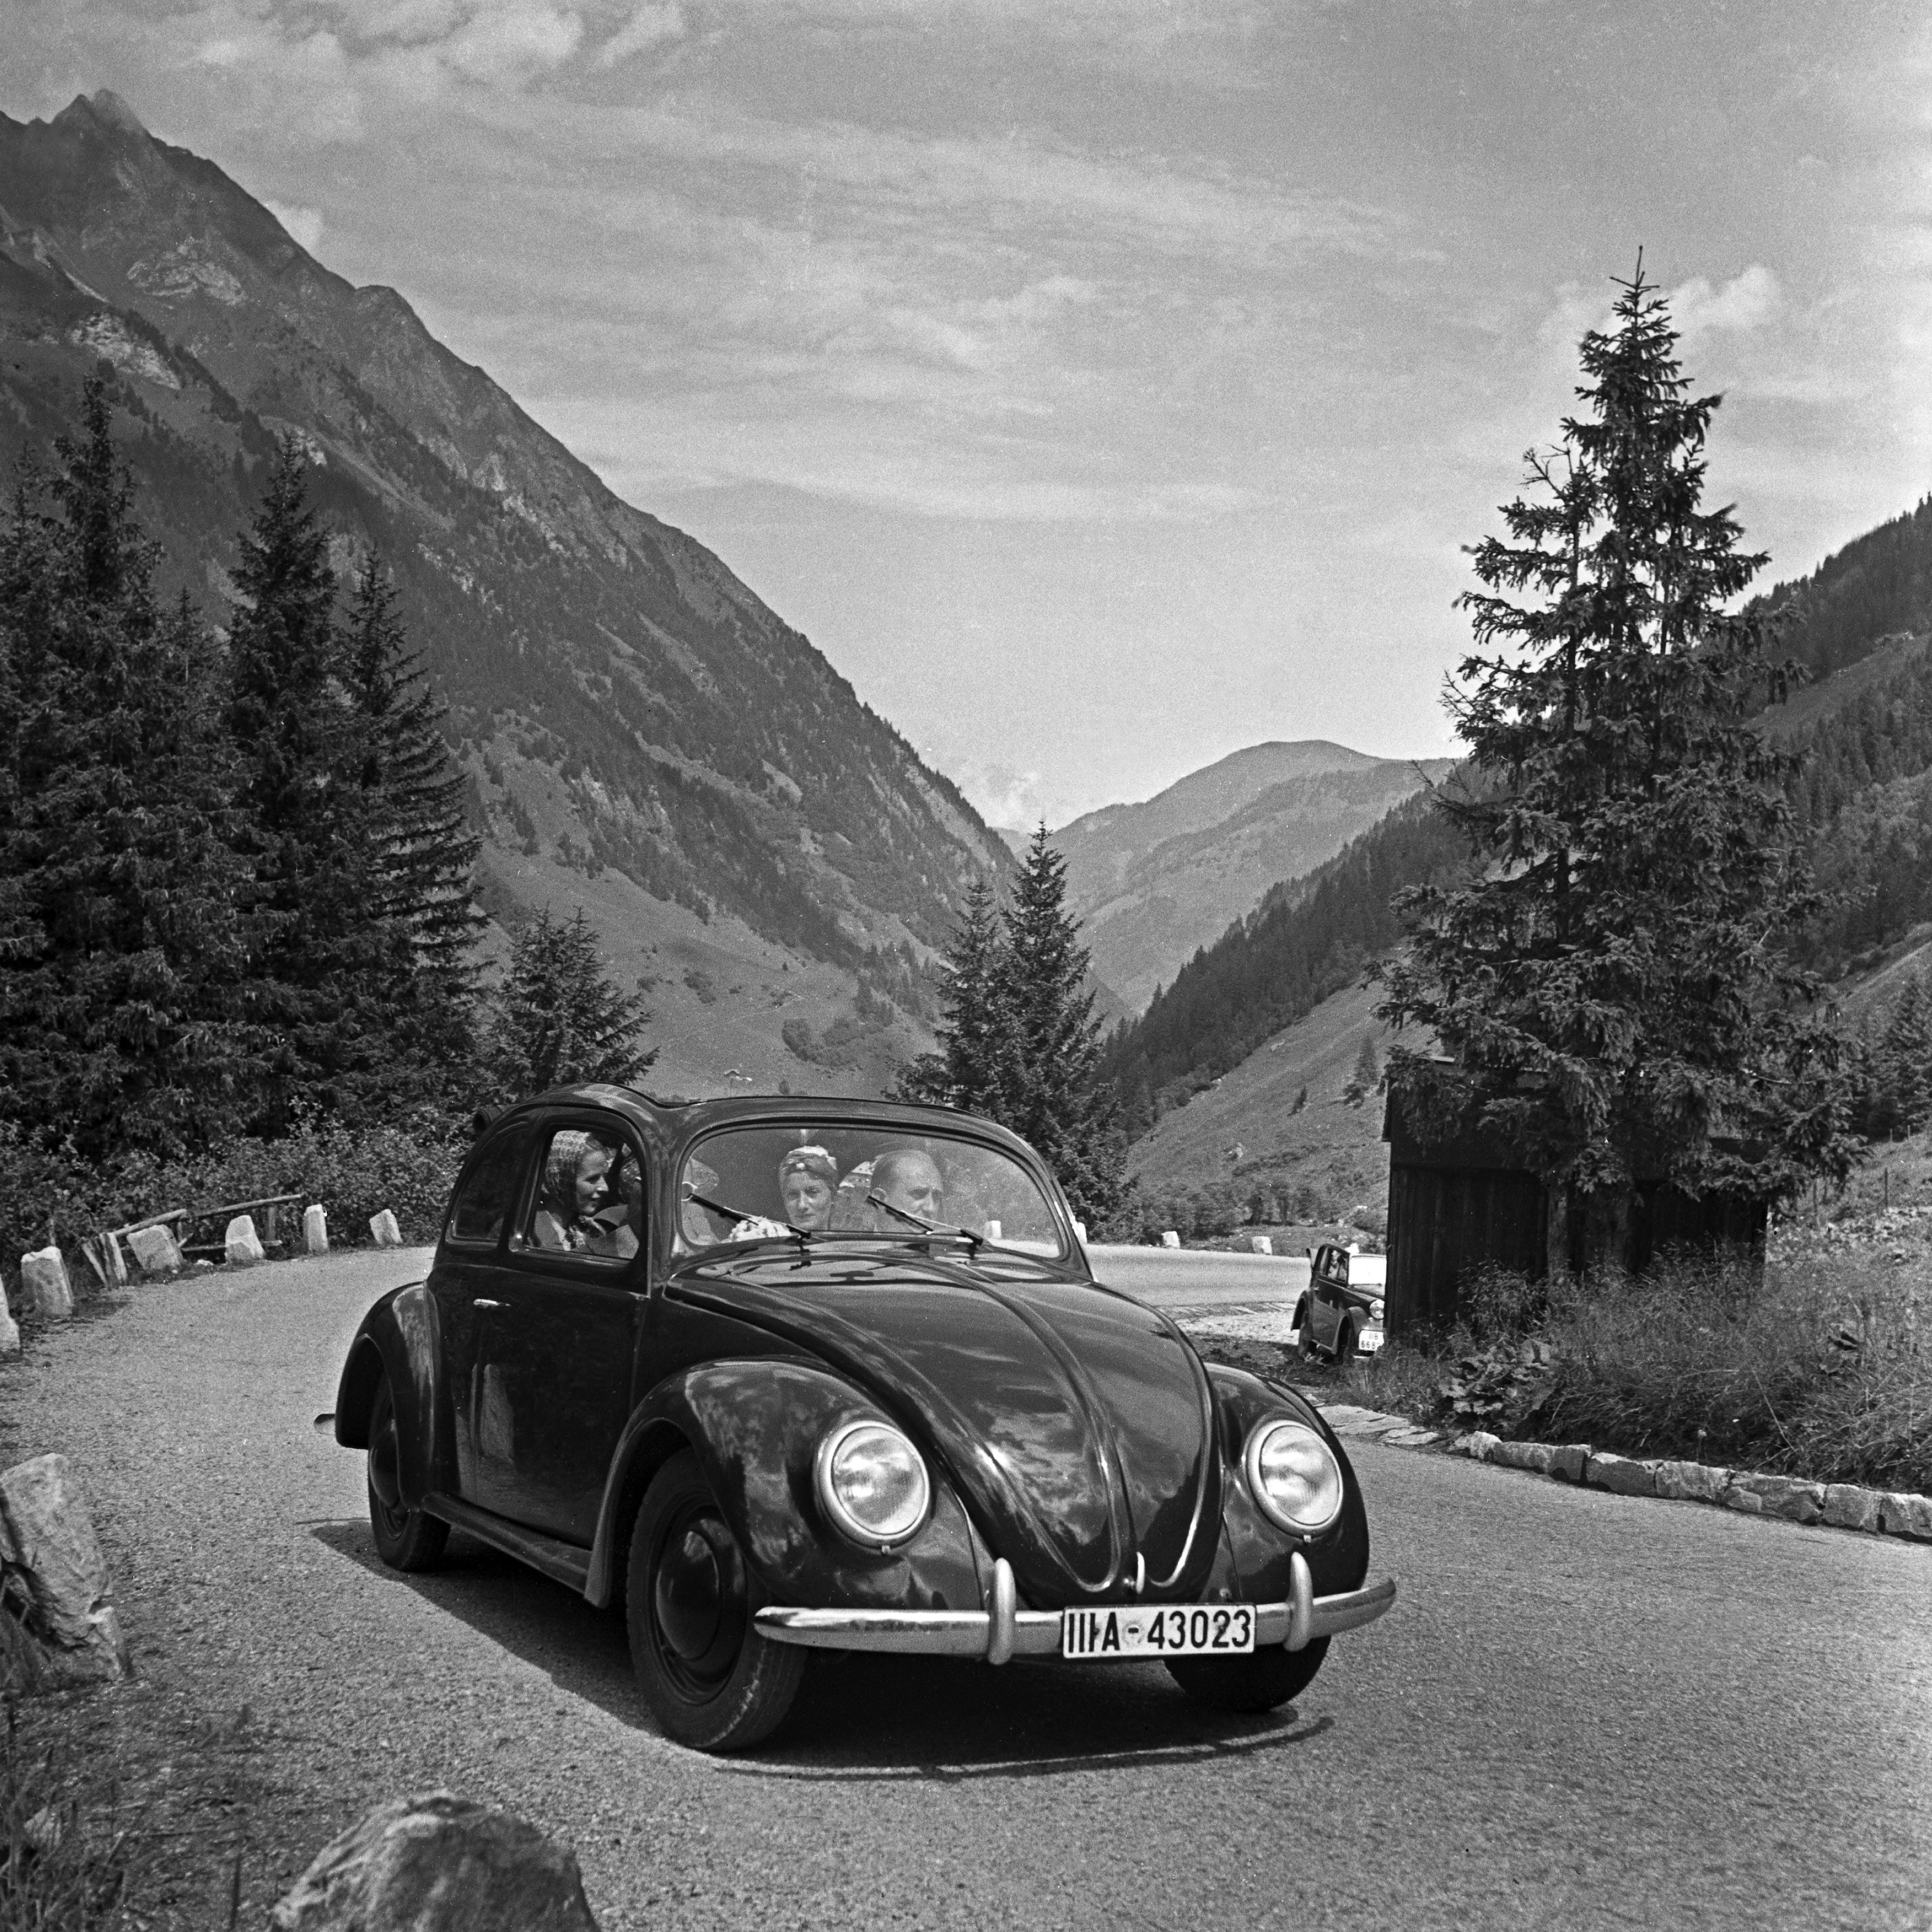 Karl Heinrich Lämmel Black and White Photograph - Exploring the countryside in a Volkswagen beetle, Germany 1939 Printed Later